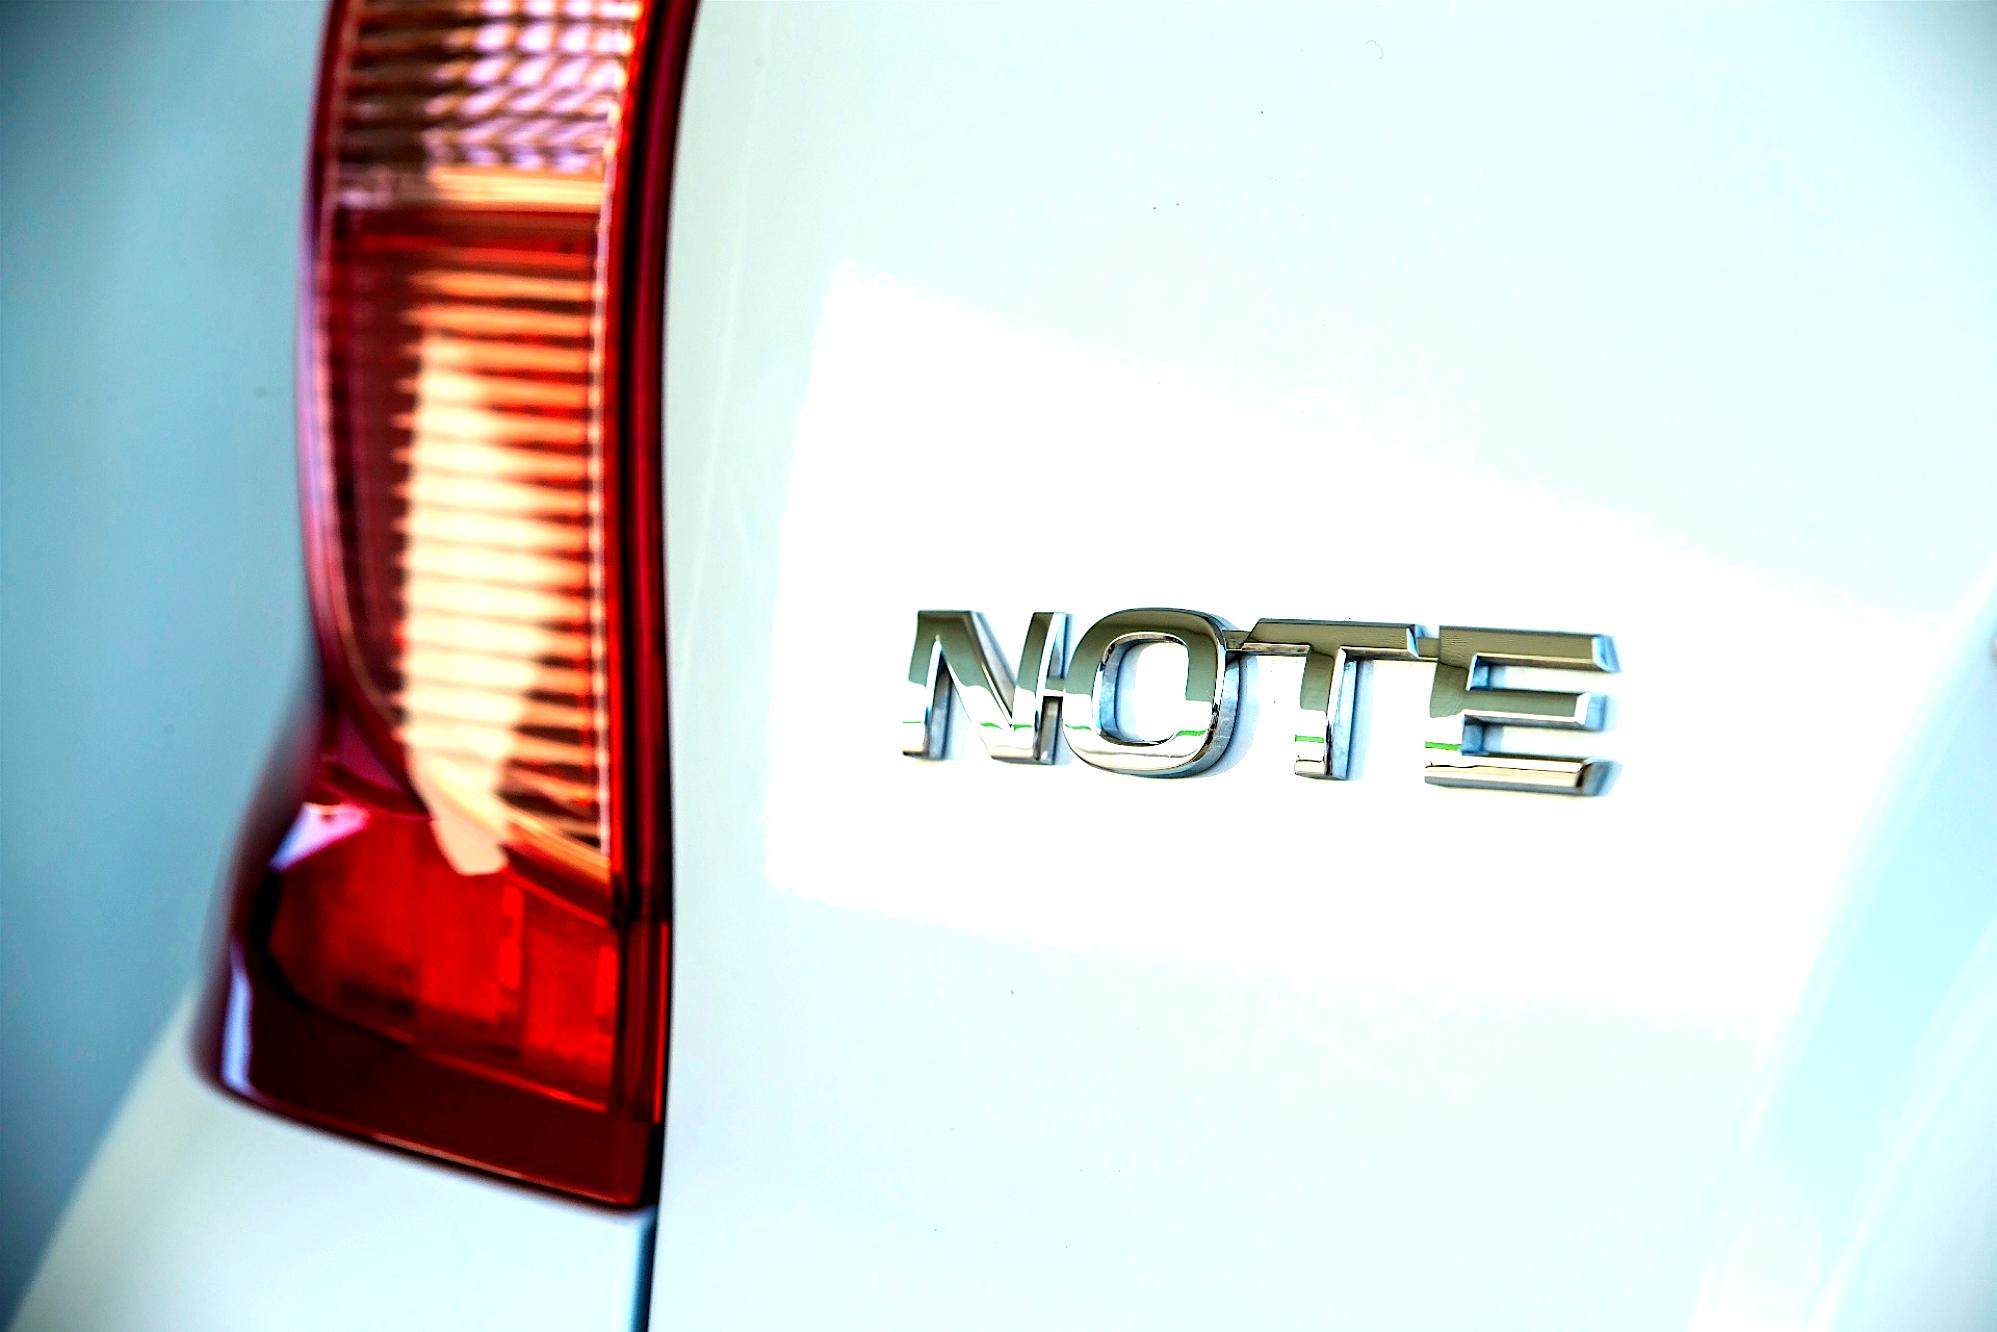 Nissan Note 2013 #71